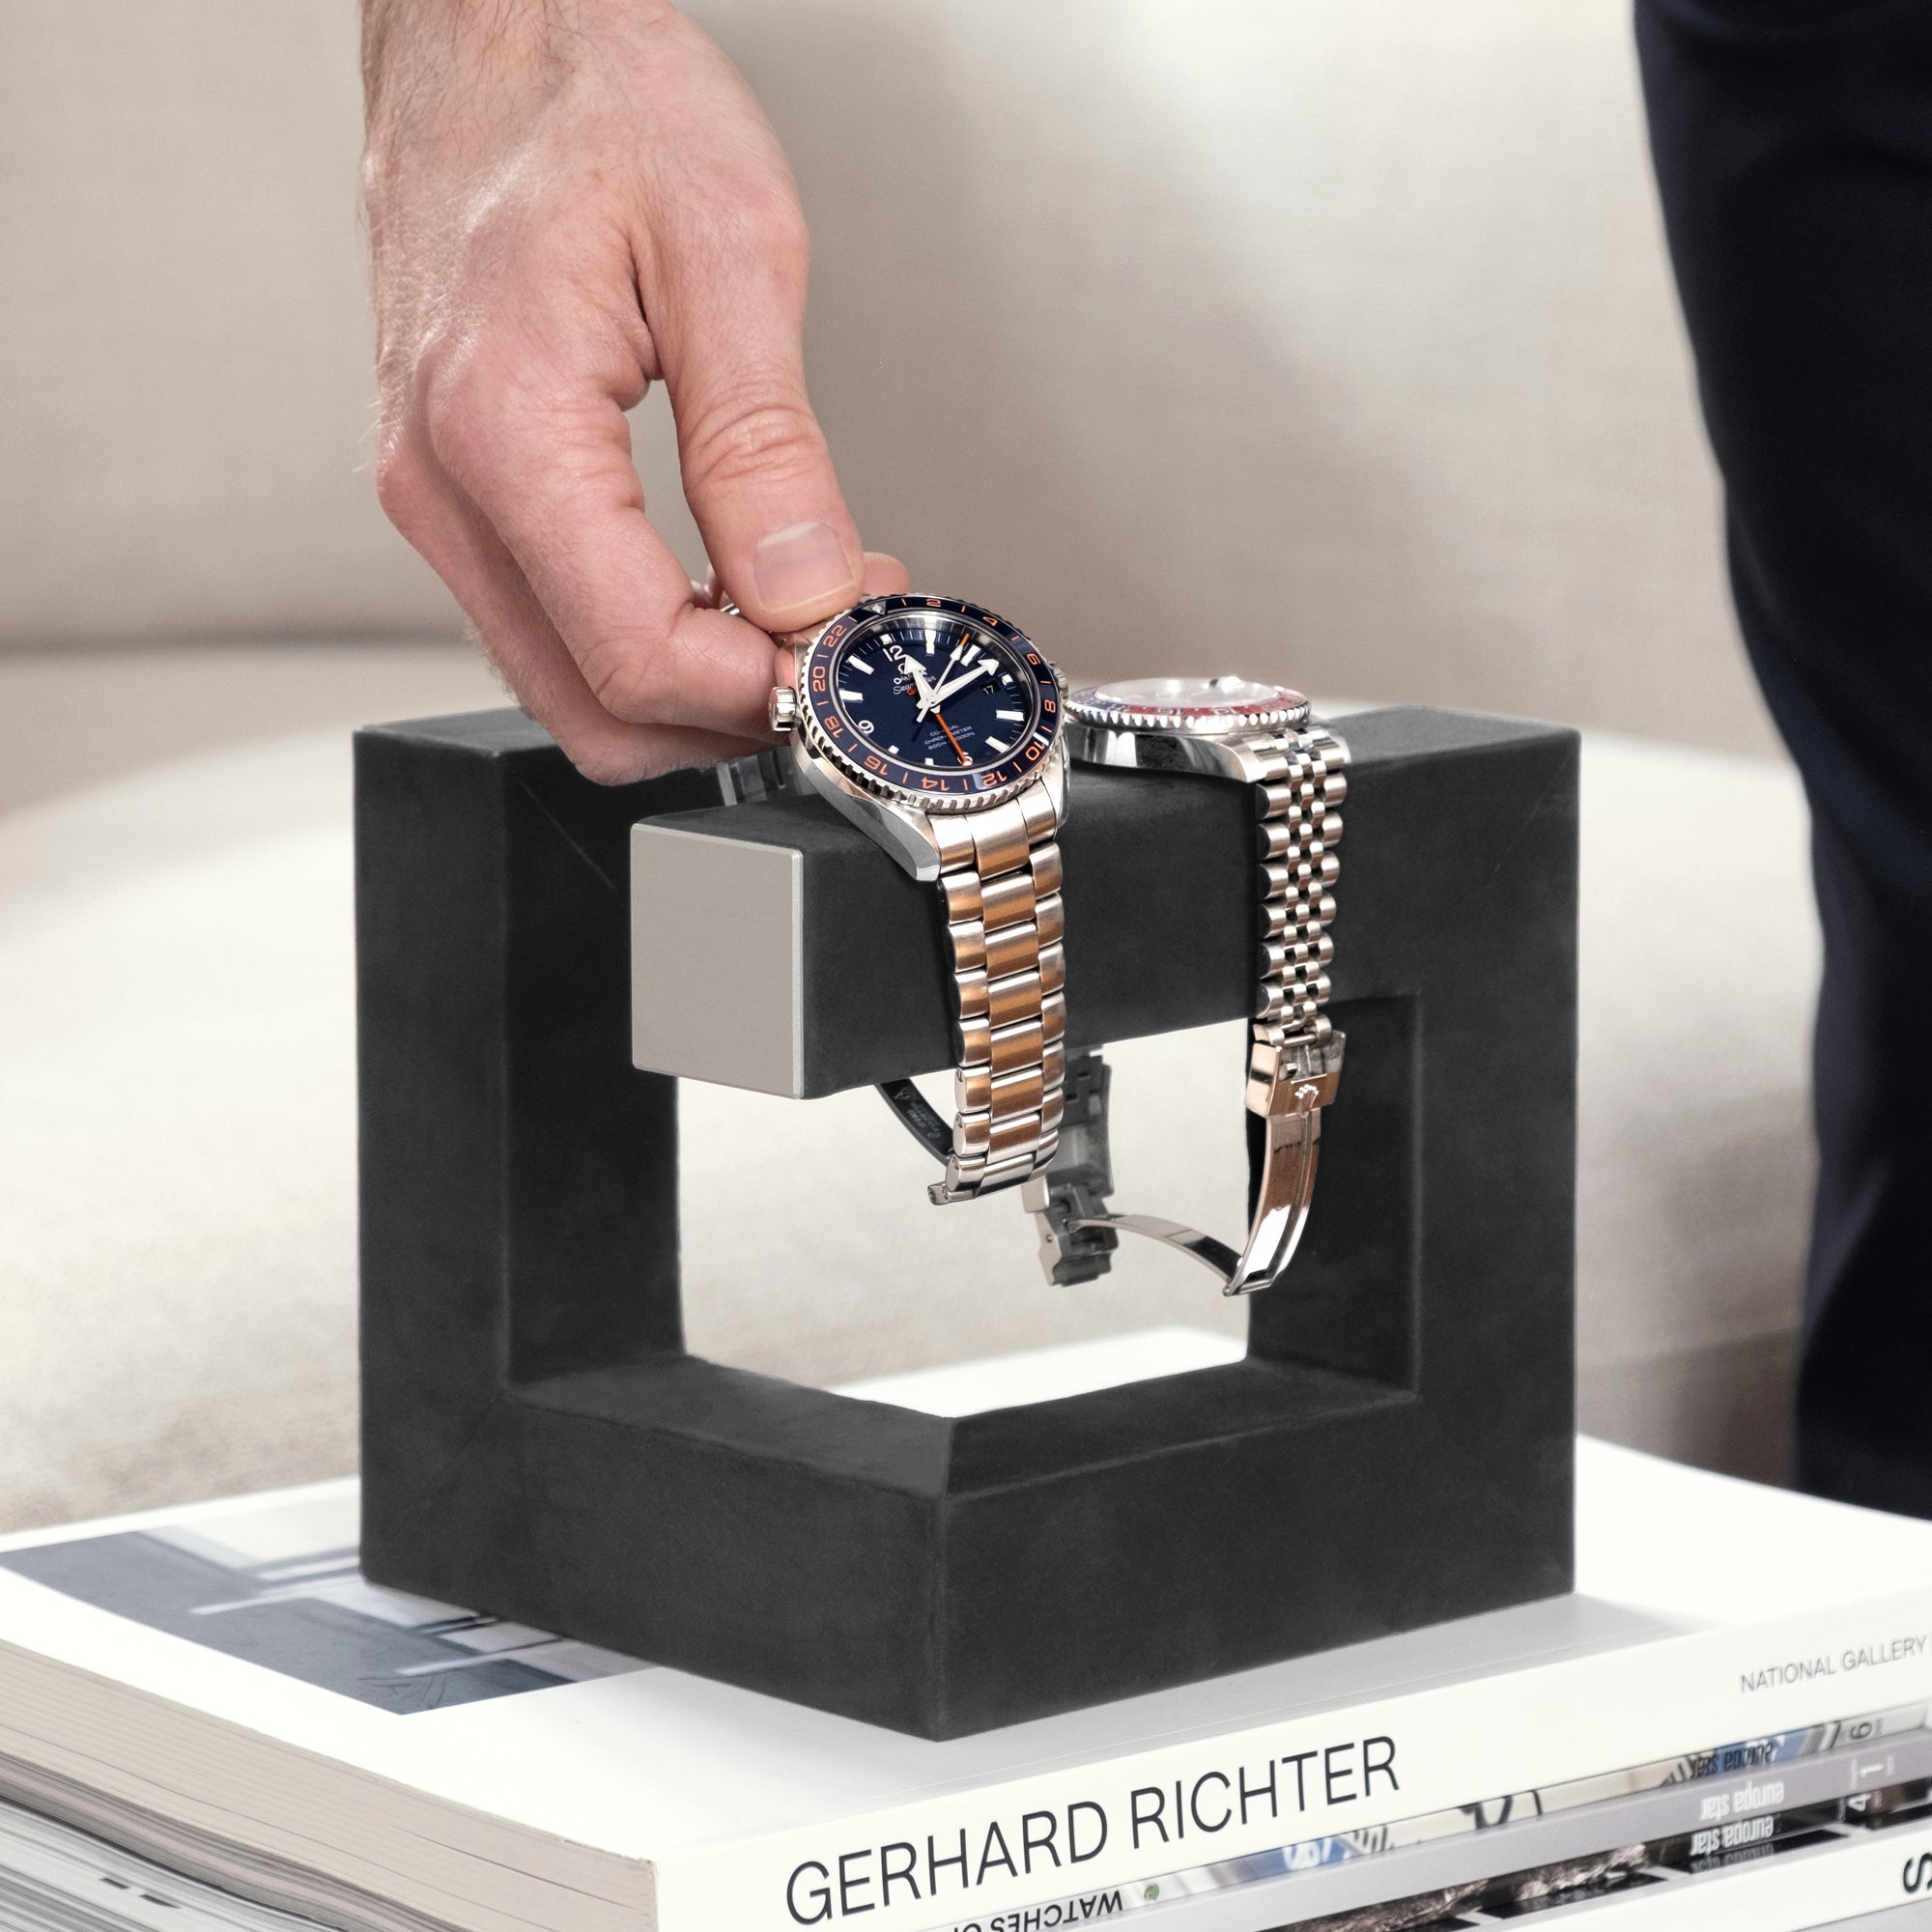 Man taking his Omega luxury watch from the Hudson 3 Watch stand in grey